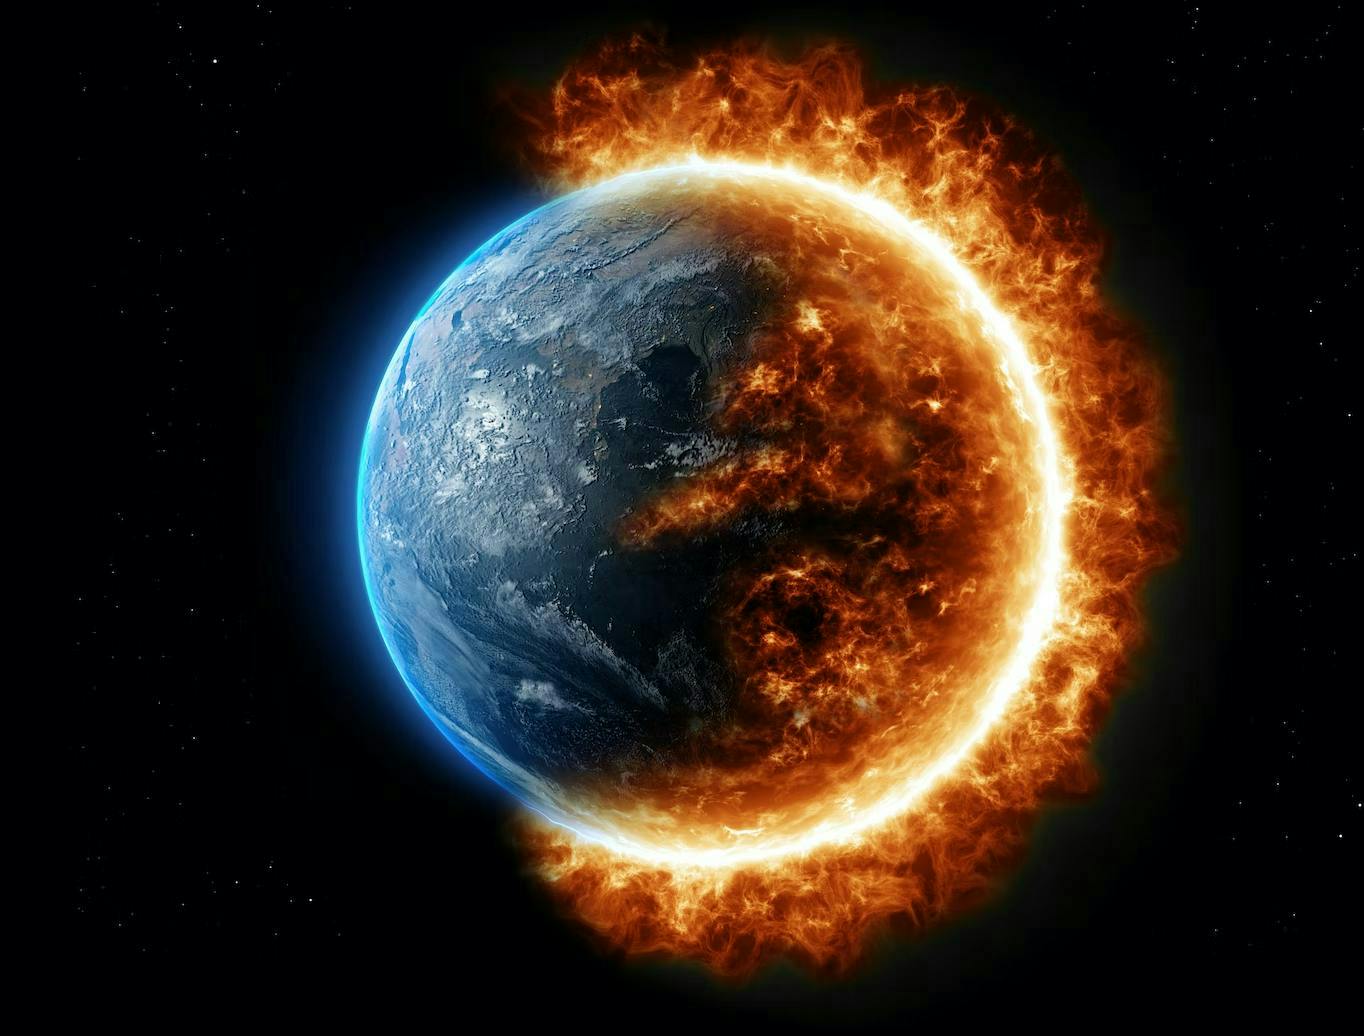 Earth's surface partially engulfed in flames, blending from icy blue to blazing orange, against a backdrop of dark space speckled with distant stars.